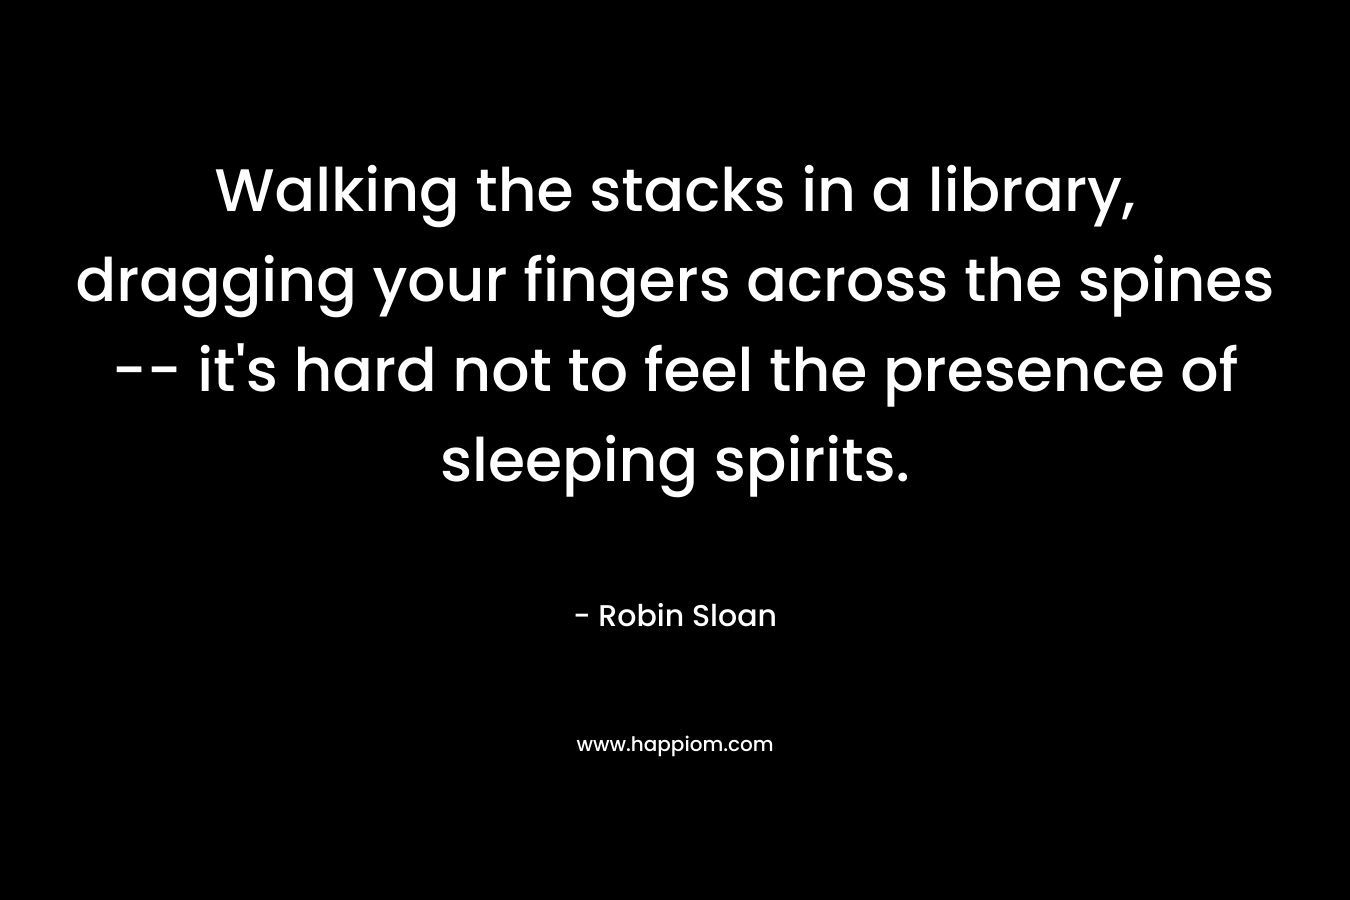 Walking the stacks in a library, dragging your fingers across the spines — it’s hard not to feel the presence of sleeping spirits. – Robin Sloan